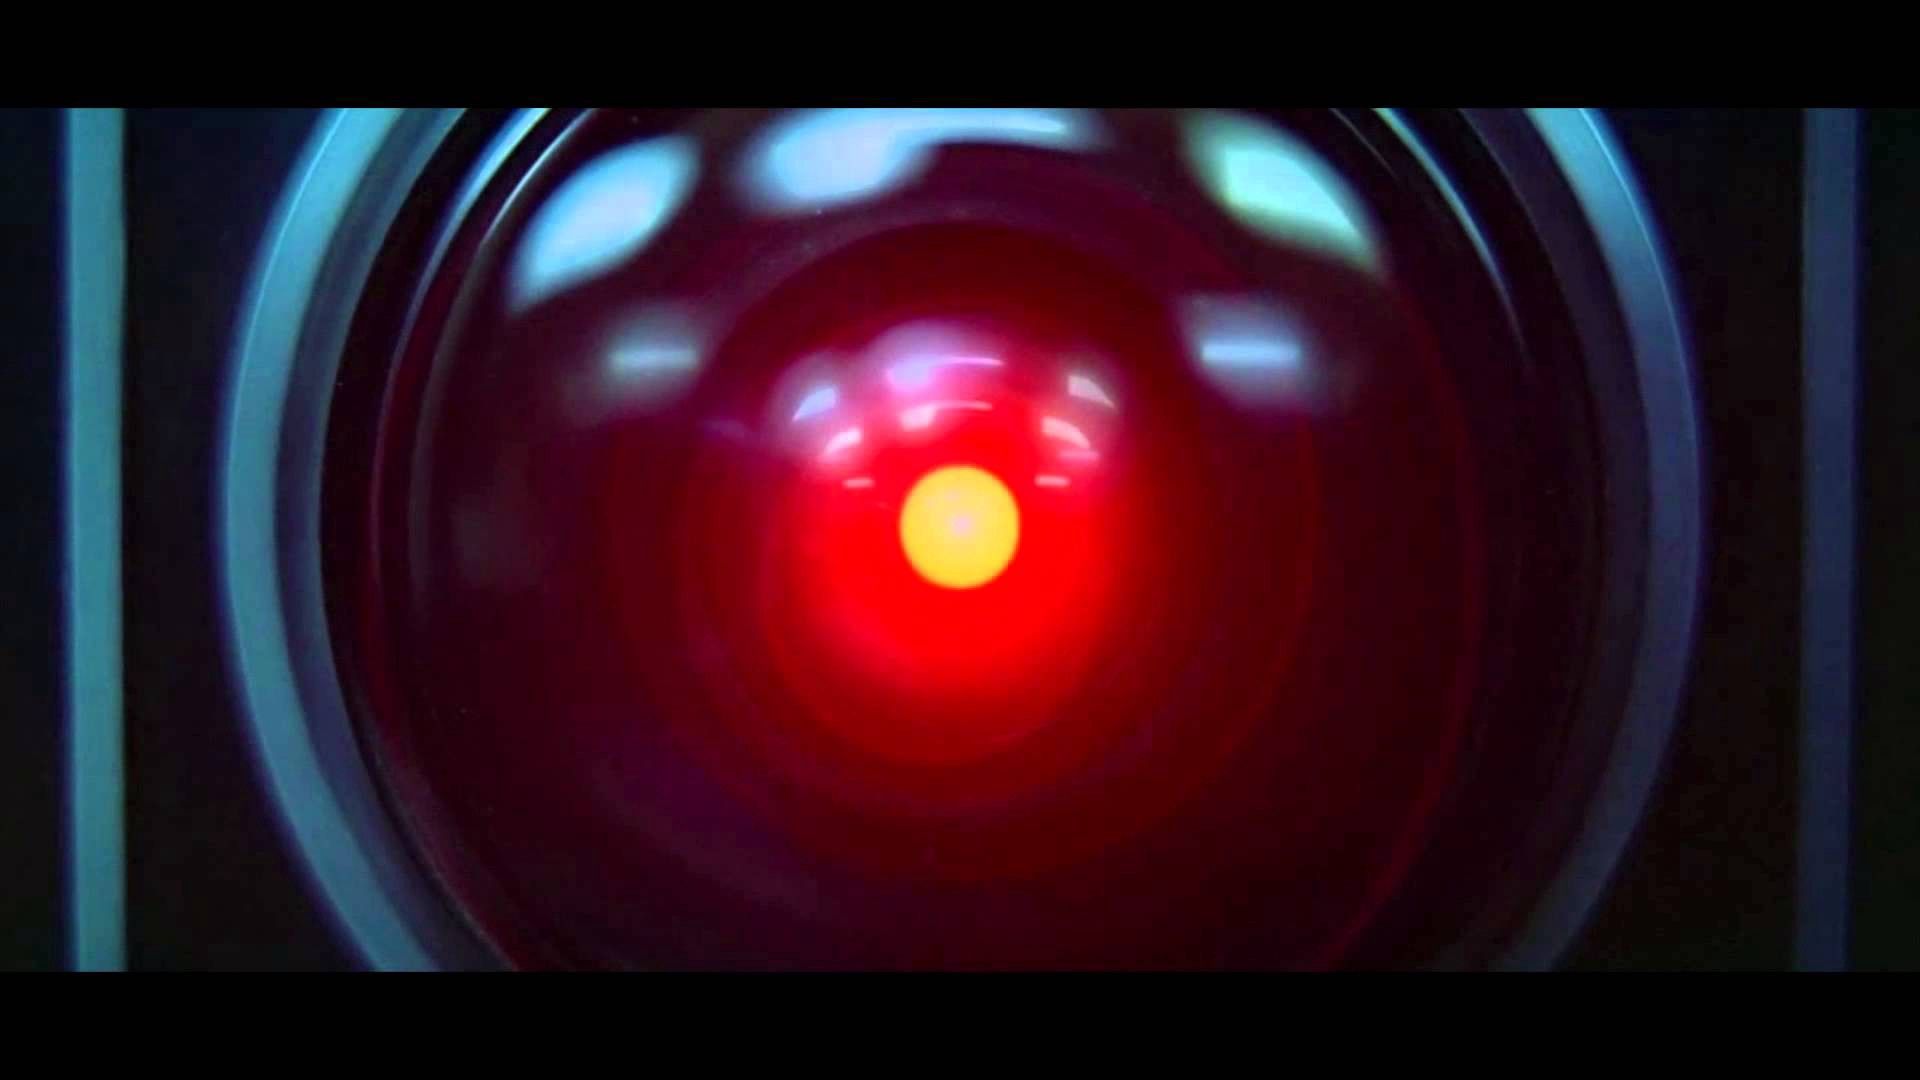 Years After 2001: A Space Odyssey, Can we Build a HAL 9000?